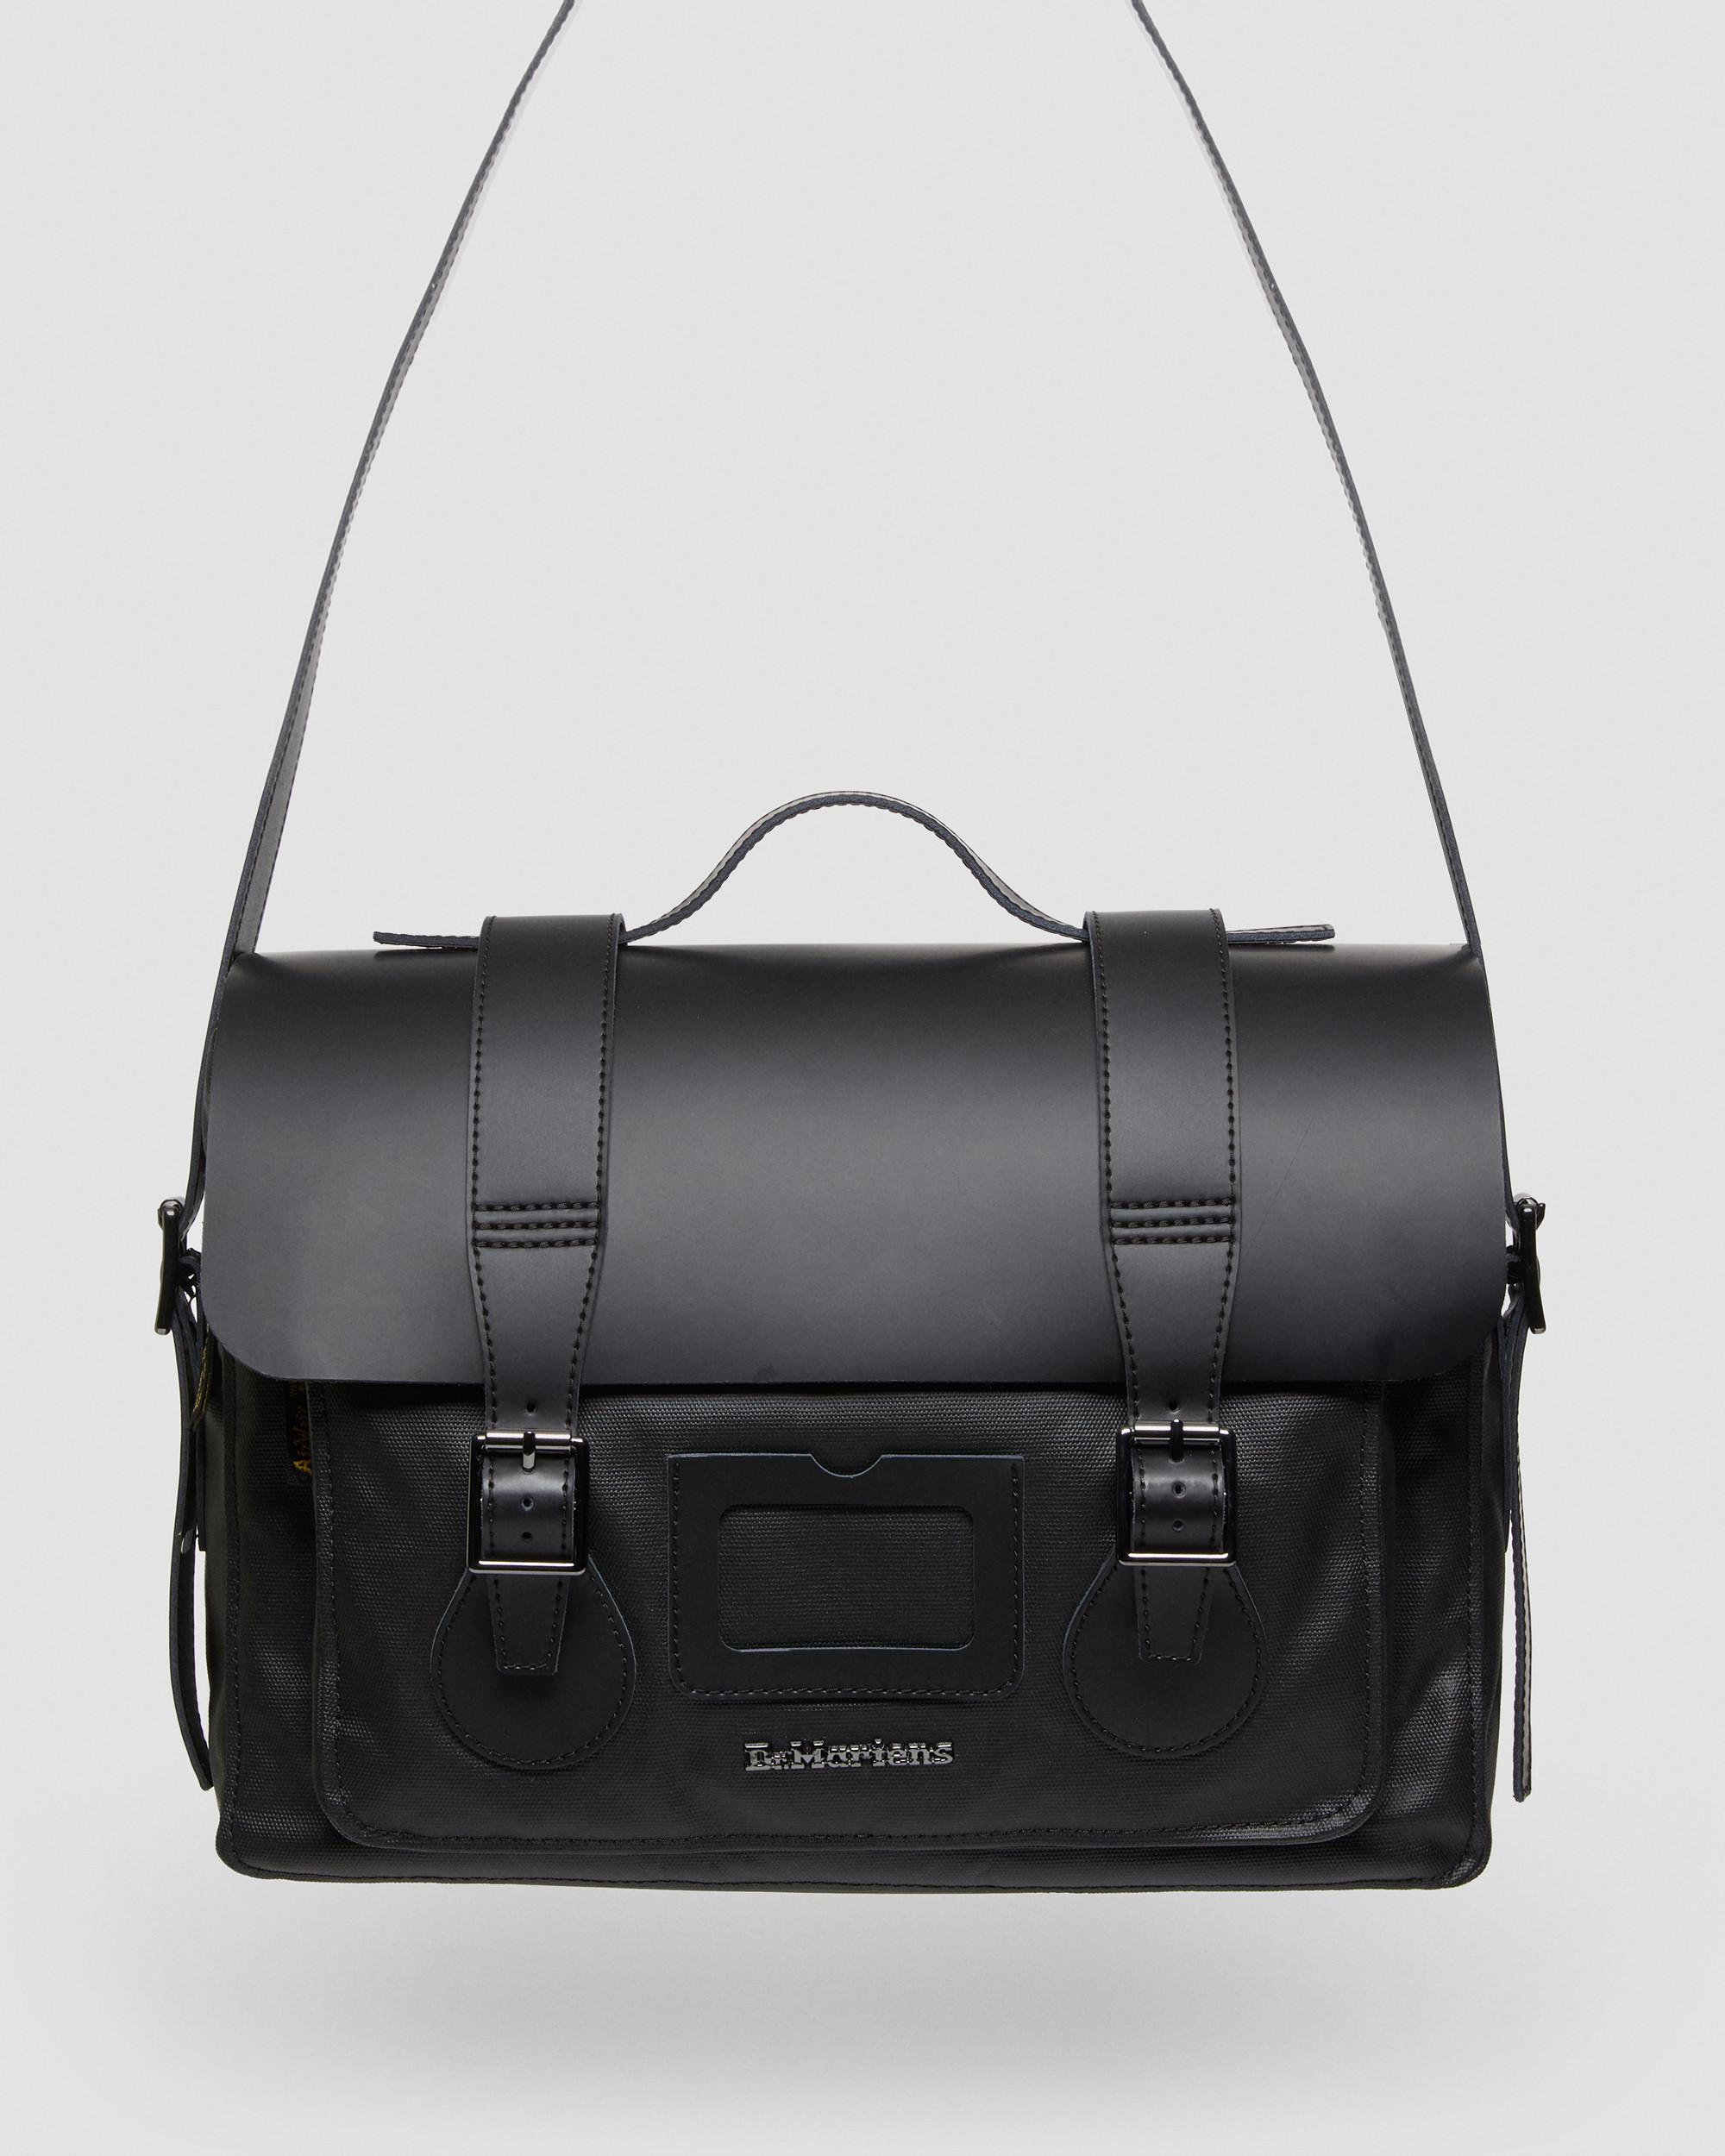 Bags, Dr Marten 11 Inch Messenger Bag In Black I Need More Space Is All